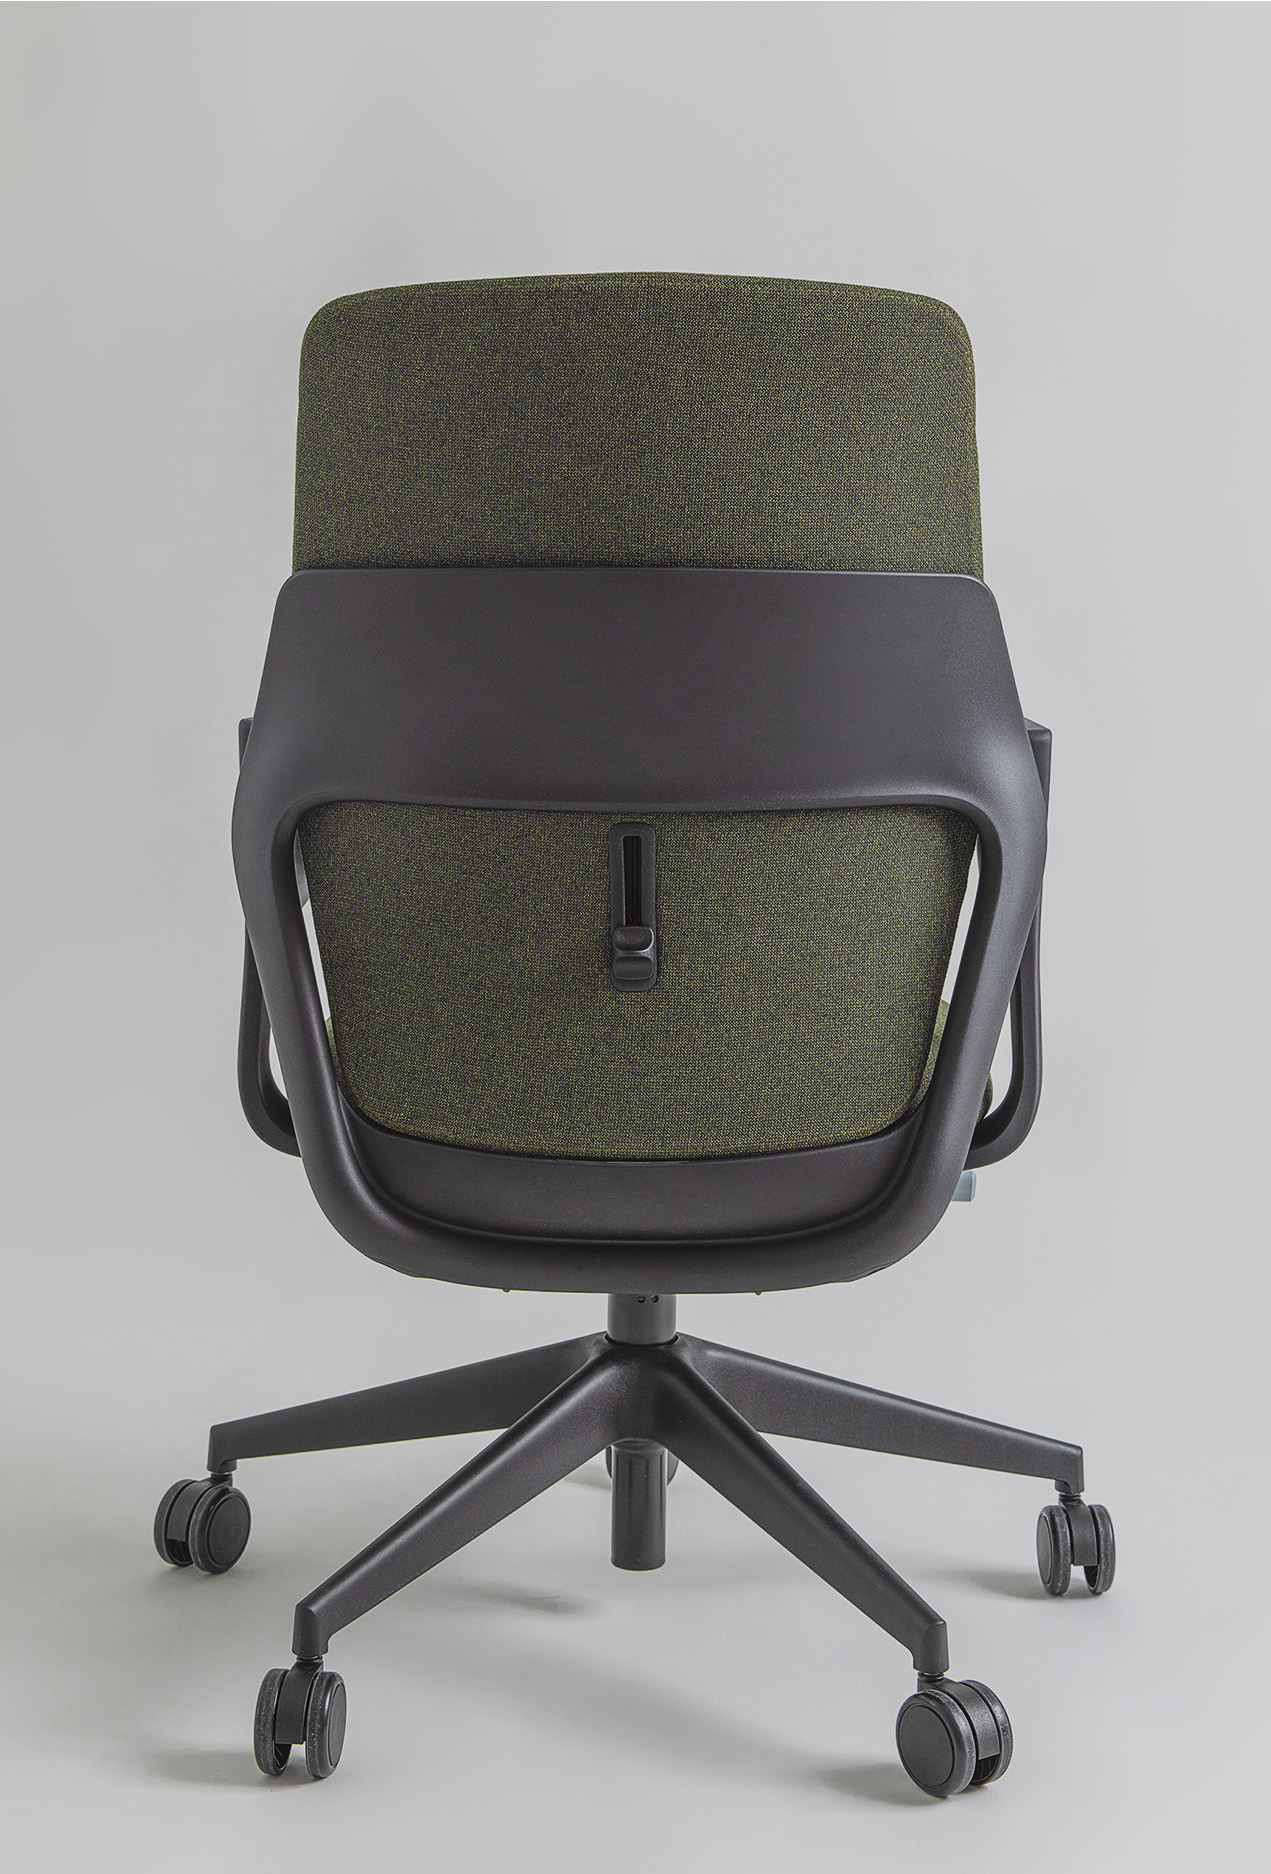 Rear view of the OFY chair in green by Narbutas, designed by Alegre Design. The chair features an ergonomic thermoplastic backrest, customizable finishes, and adjustable lumbar support, perfect for hybrid and modern workspaces.